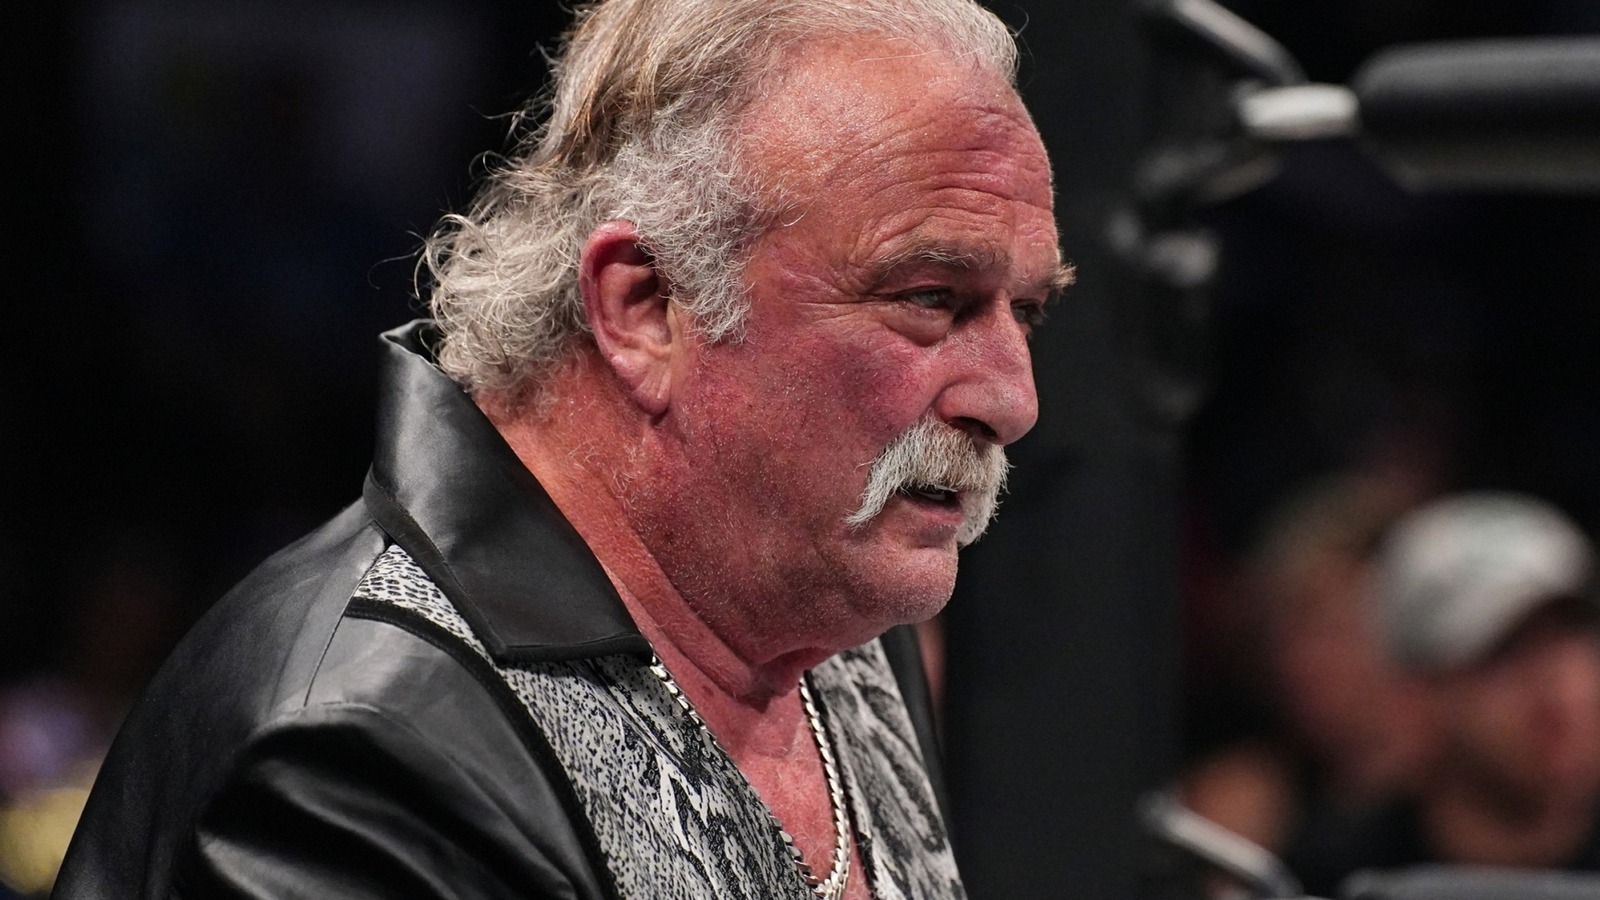 AEW Star Jake 'The Snake' Roberts On What He Wants To Be Remembered For